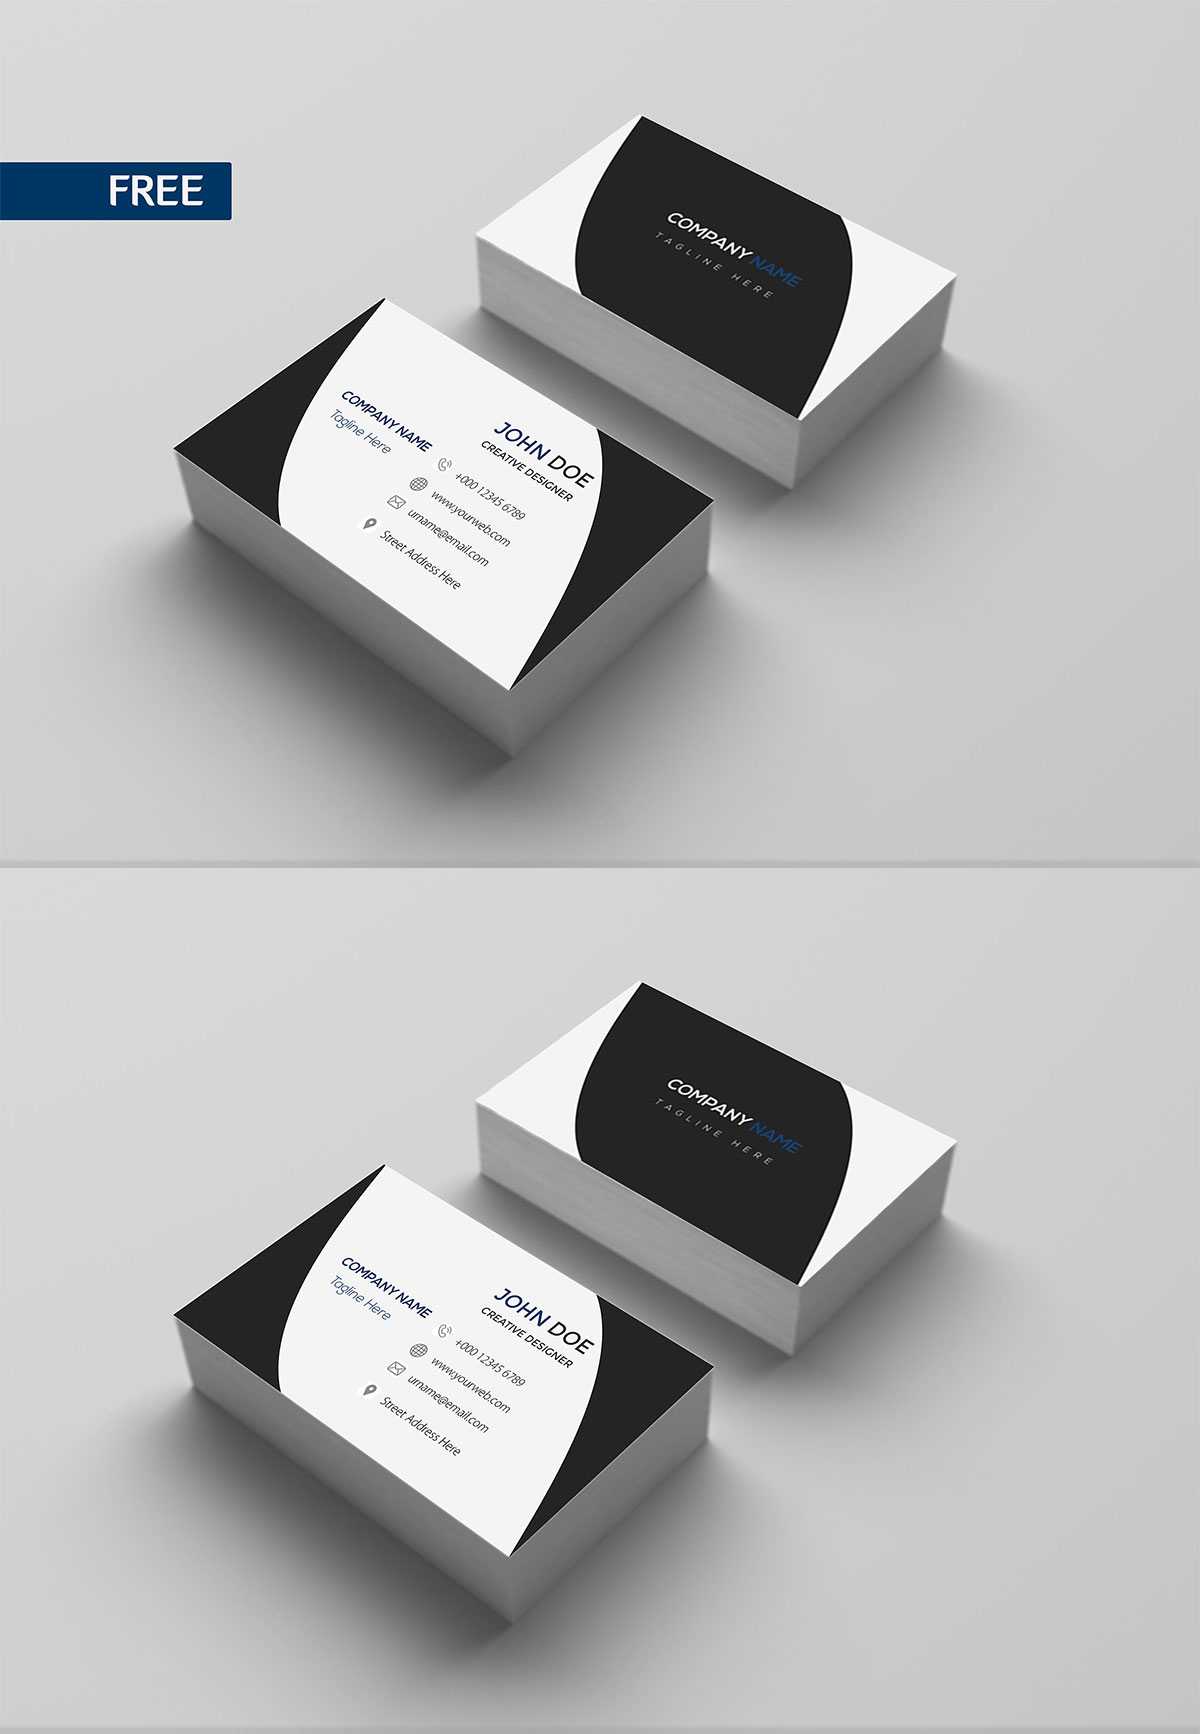 Free Print Design Business Card Template - Creativetacos Pertaining To Free Template Business Cards To Print